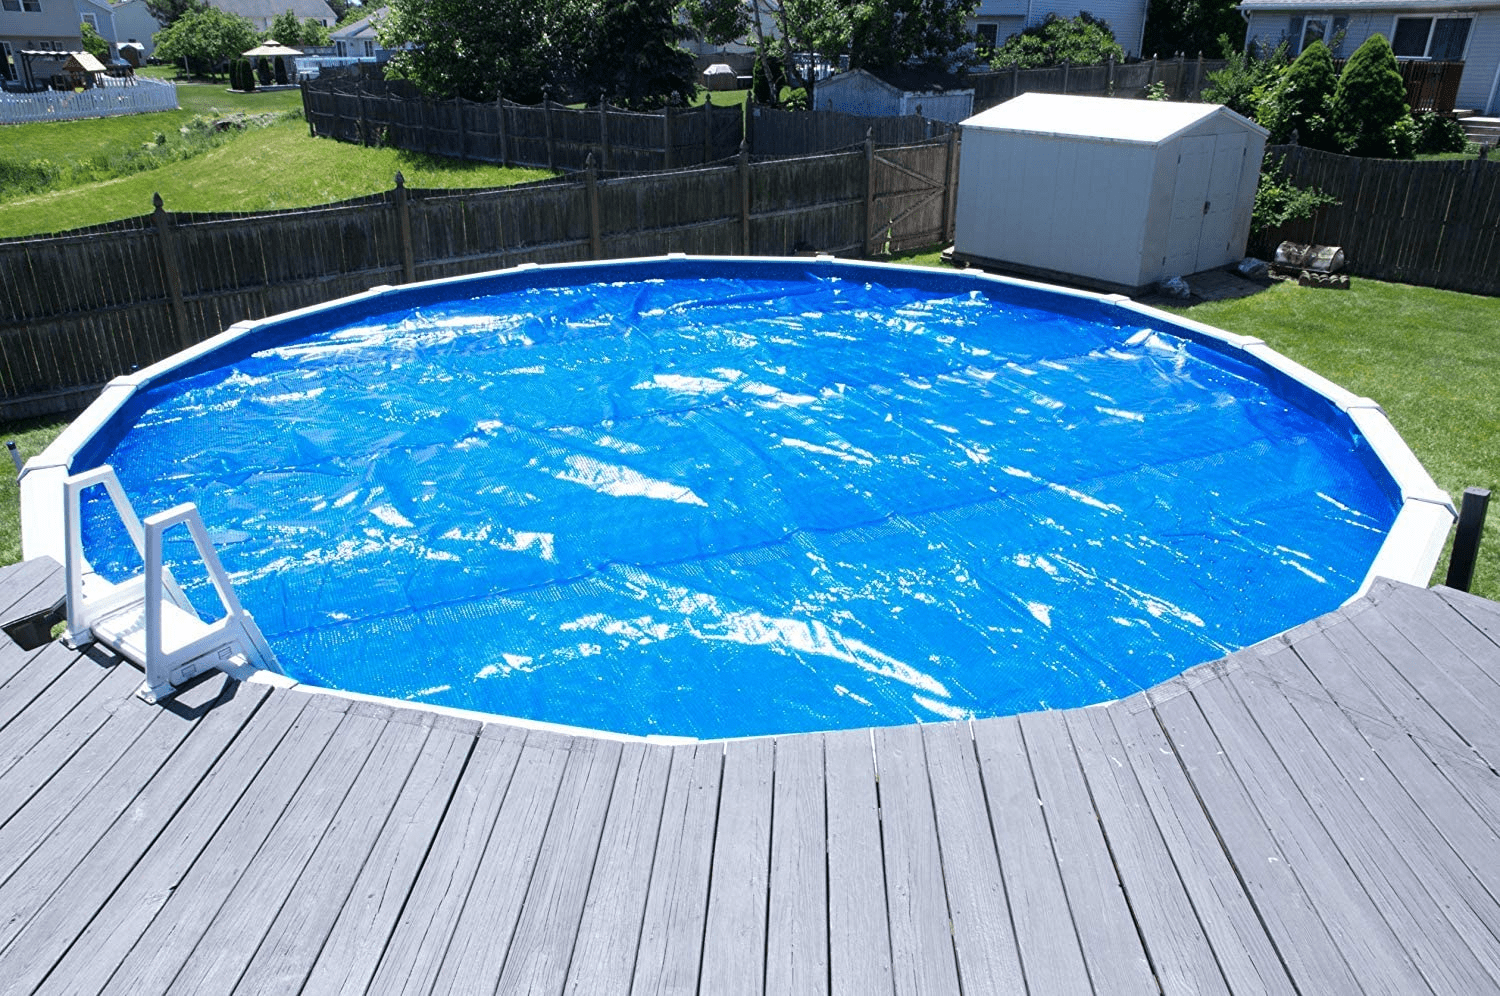 Frame Pool Cover Bestine 8/10/ 12/ 15ft Diameter Solar Pool Cover for Swimming Pool Pool Protector Mat Insulation for Hot Tub Rainproof Dust Cover 